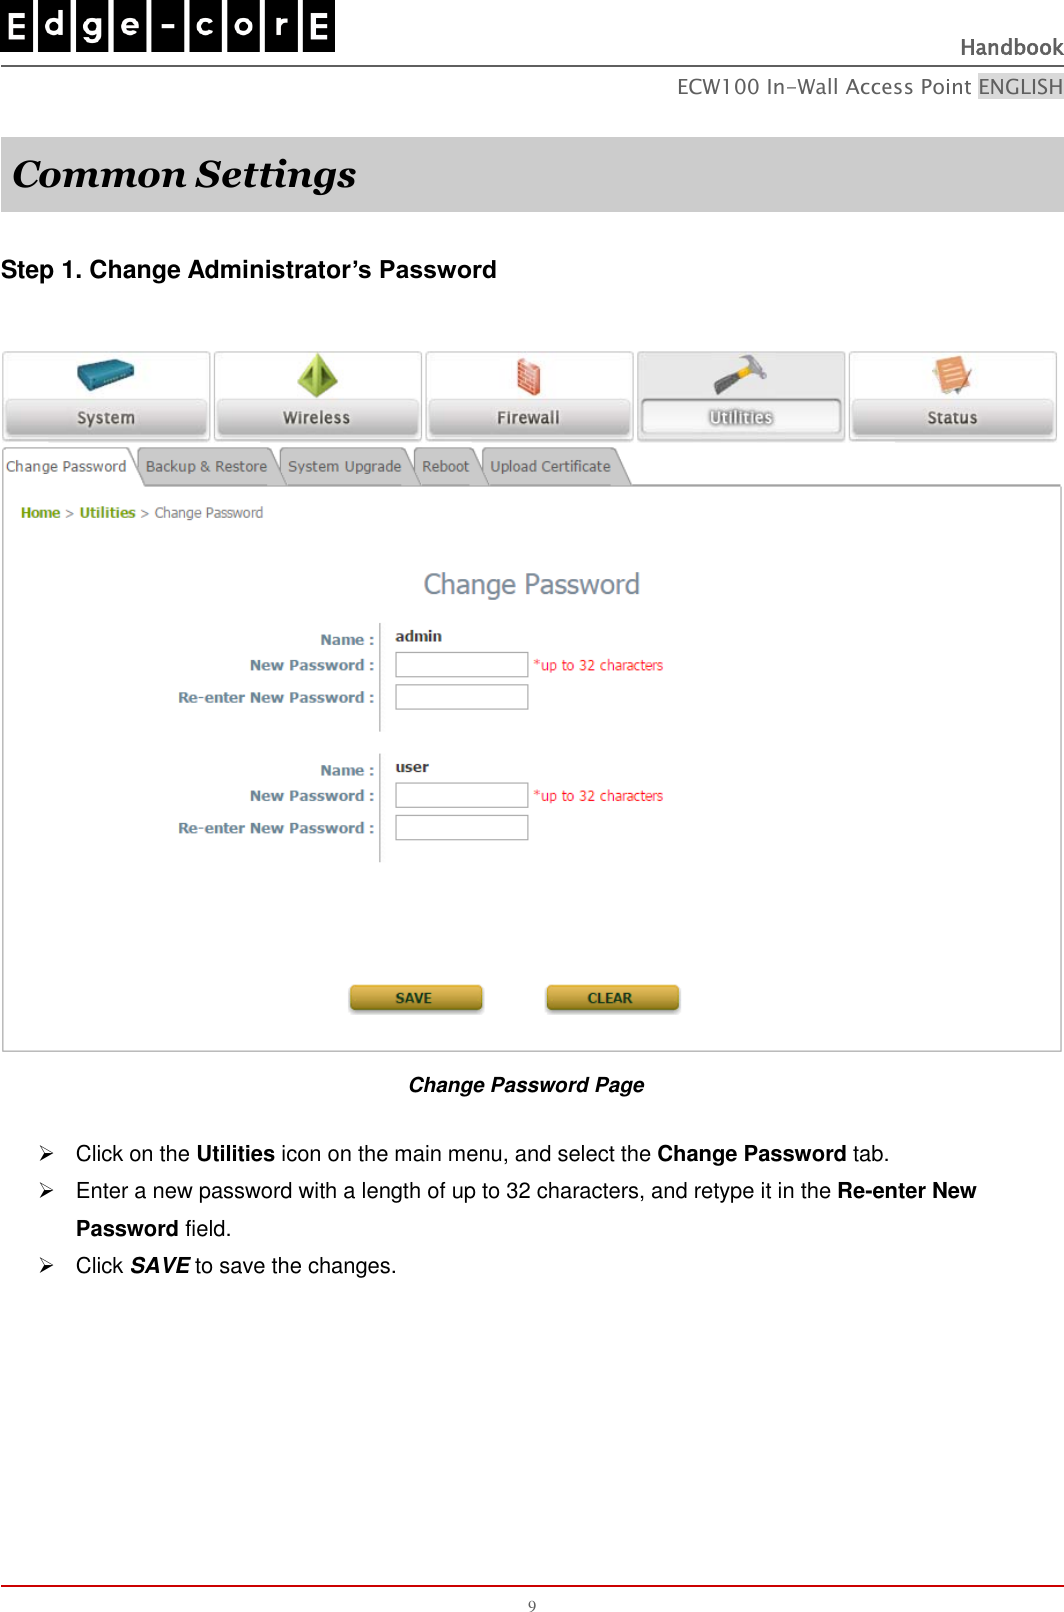   Handbook ECW100 In-Wall Access Point ENGLISH 9  Common Settings  Step 1. Change Administrator’s Password   Change Password Page   Click on the Utilities icon on the main menu, and select the Change Password tab.   Enter a new password with a length of up to 32 characters, and retype it in the Re-enter New Password field.   Click SAVE to save the changes.   